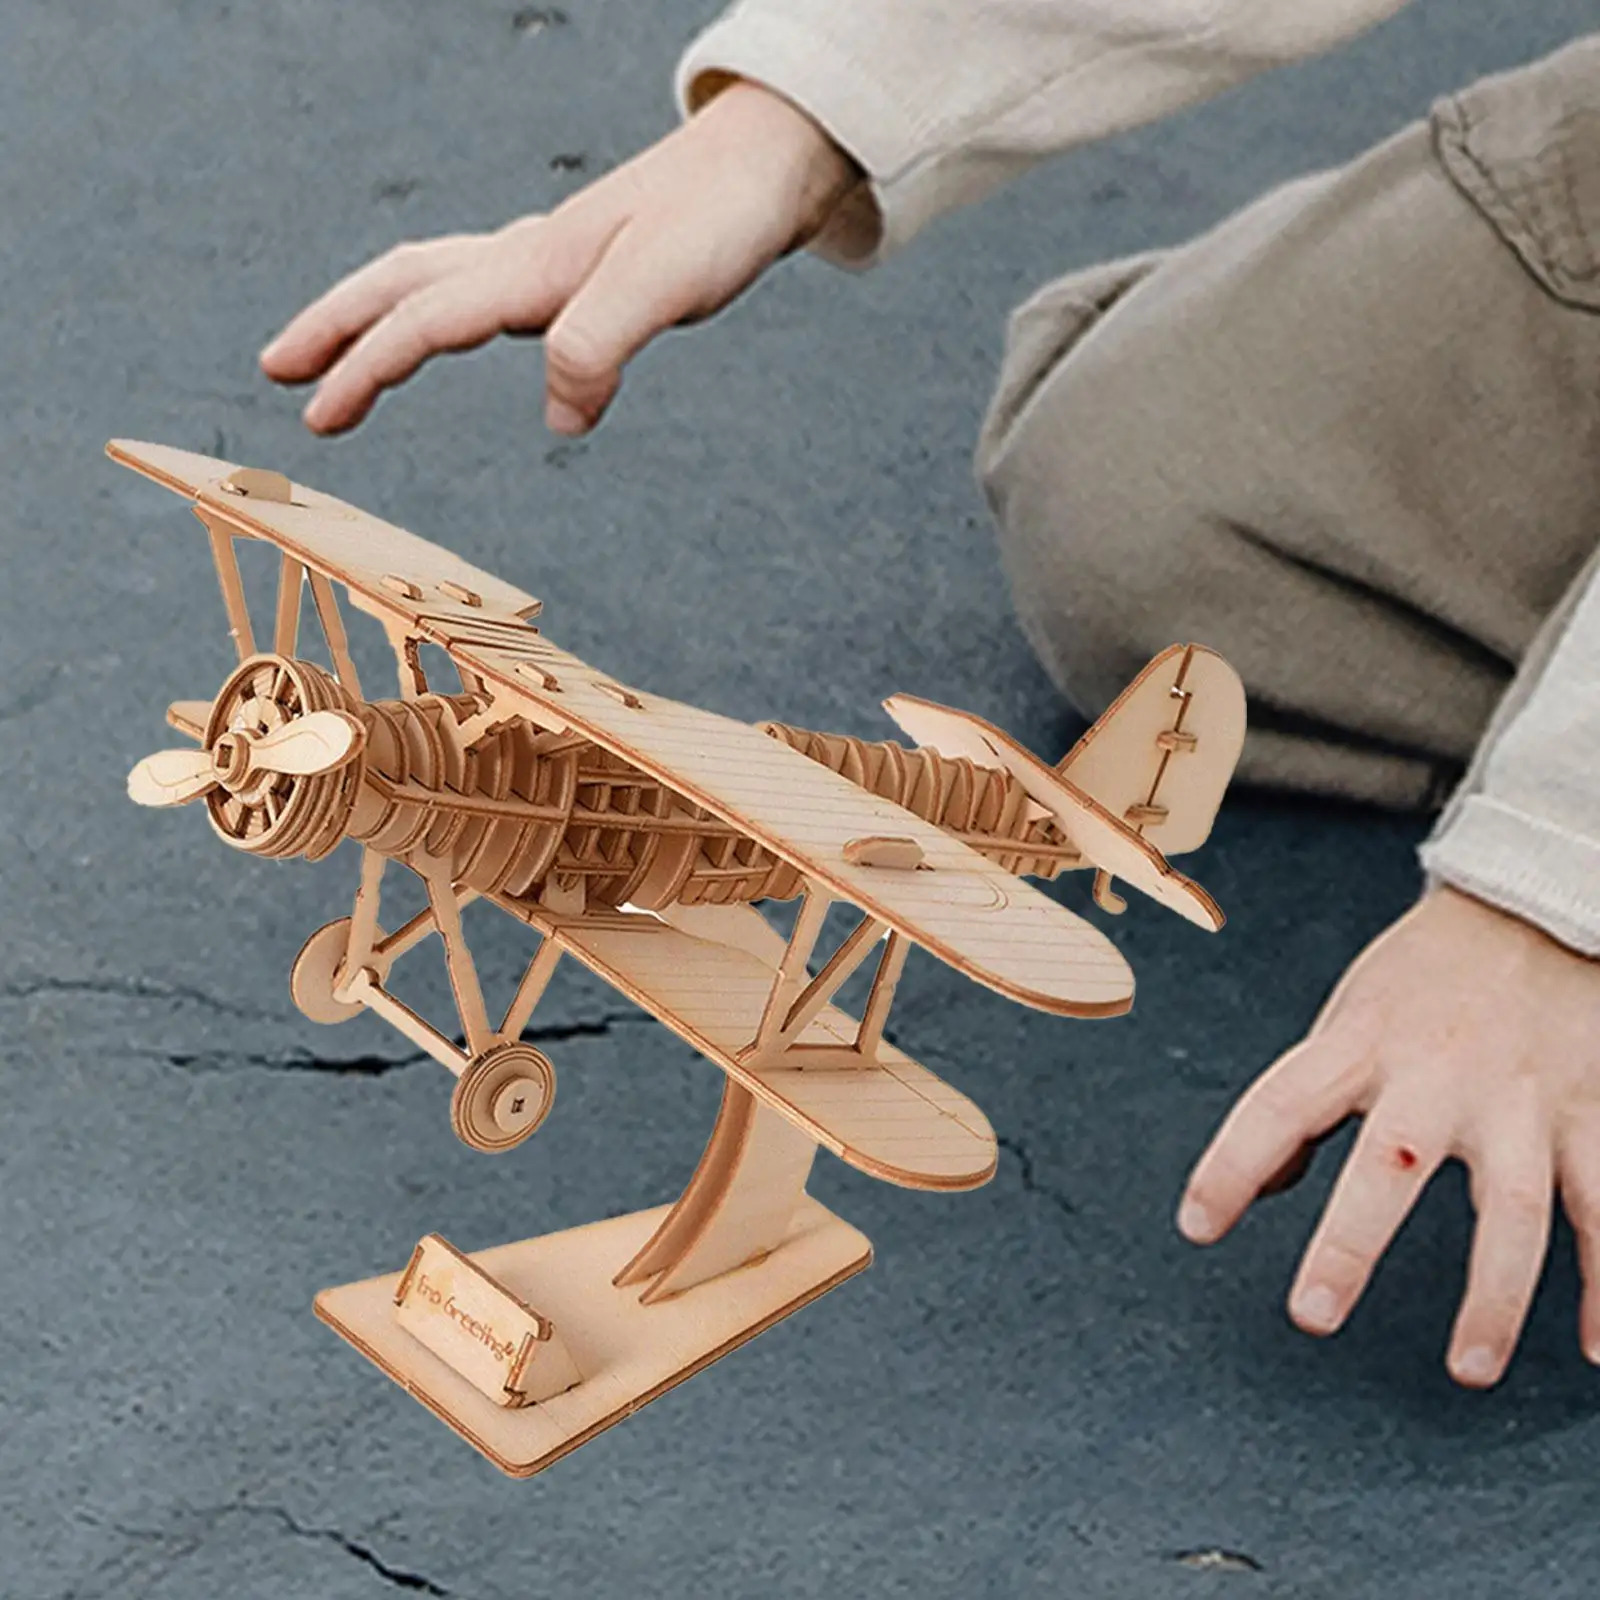 3D Wooden Puzzle Biplane Model Learning Toy Cute Plane Mechanical Model Kits for Indoor Bathroom Dining Room Living Room Kitchen